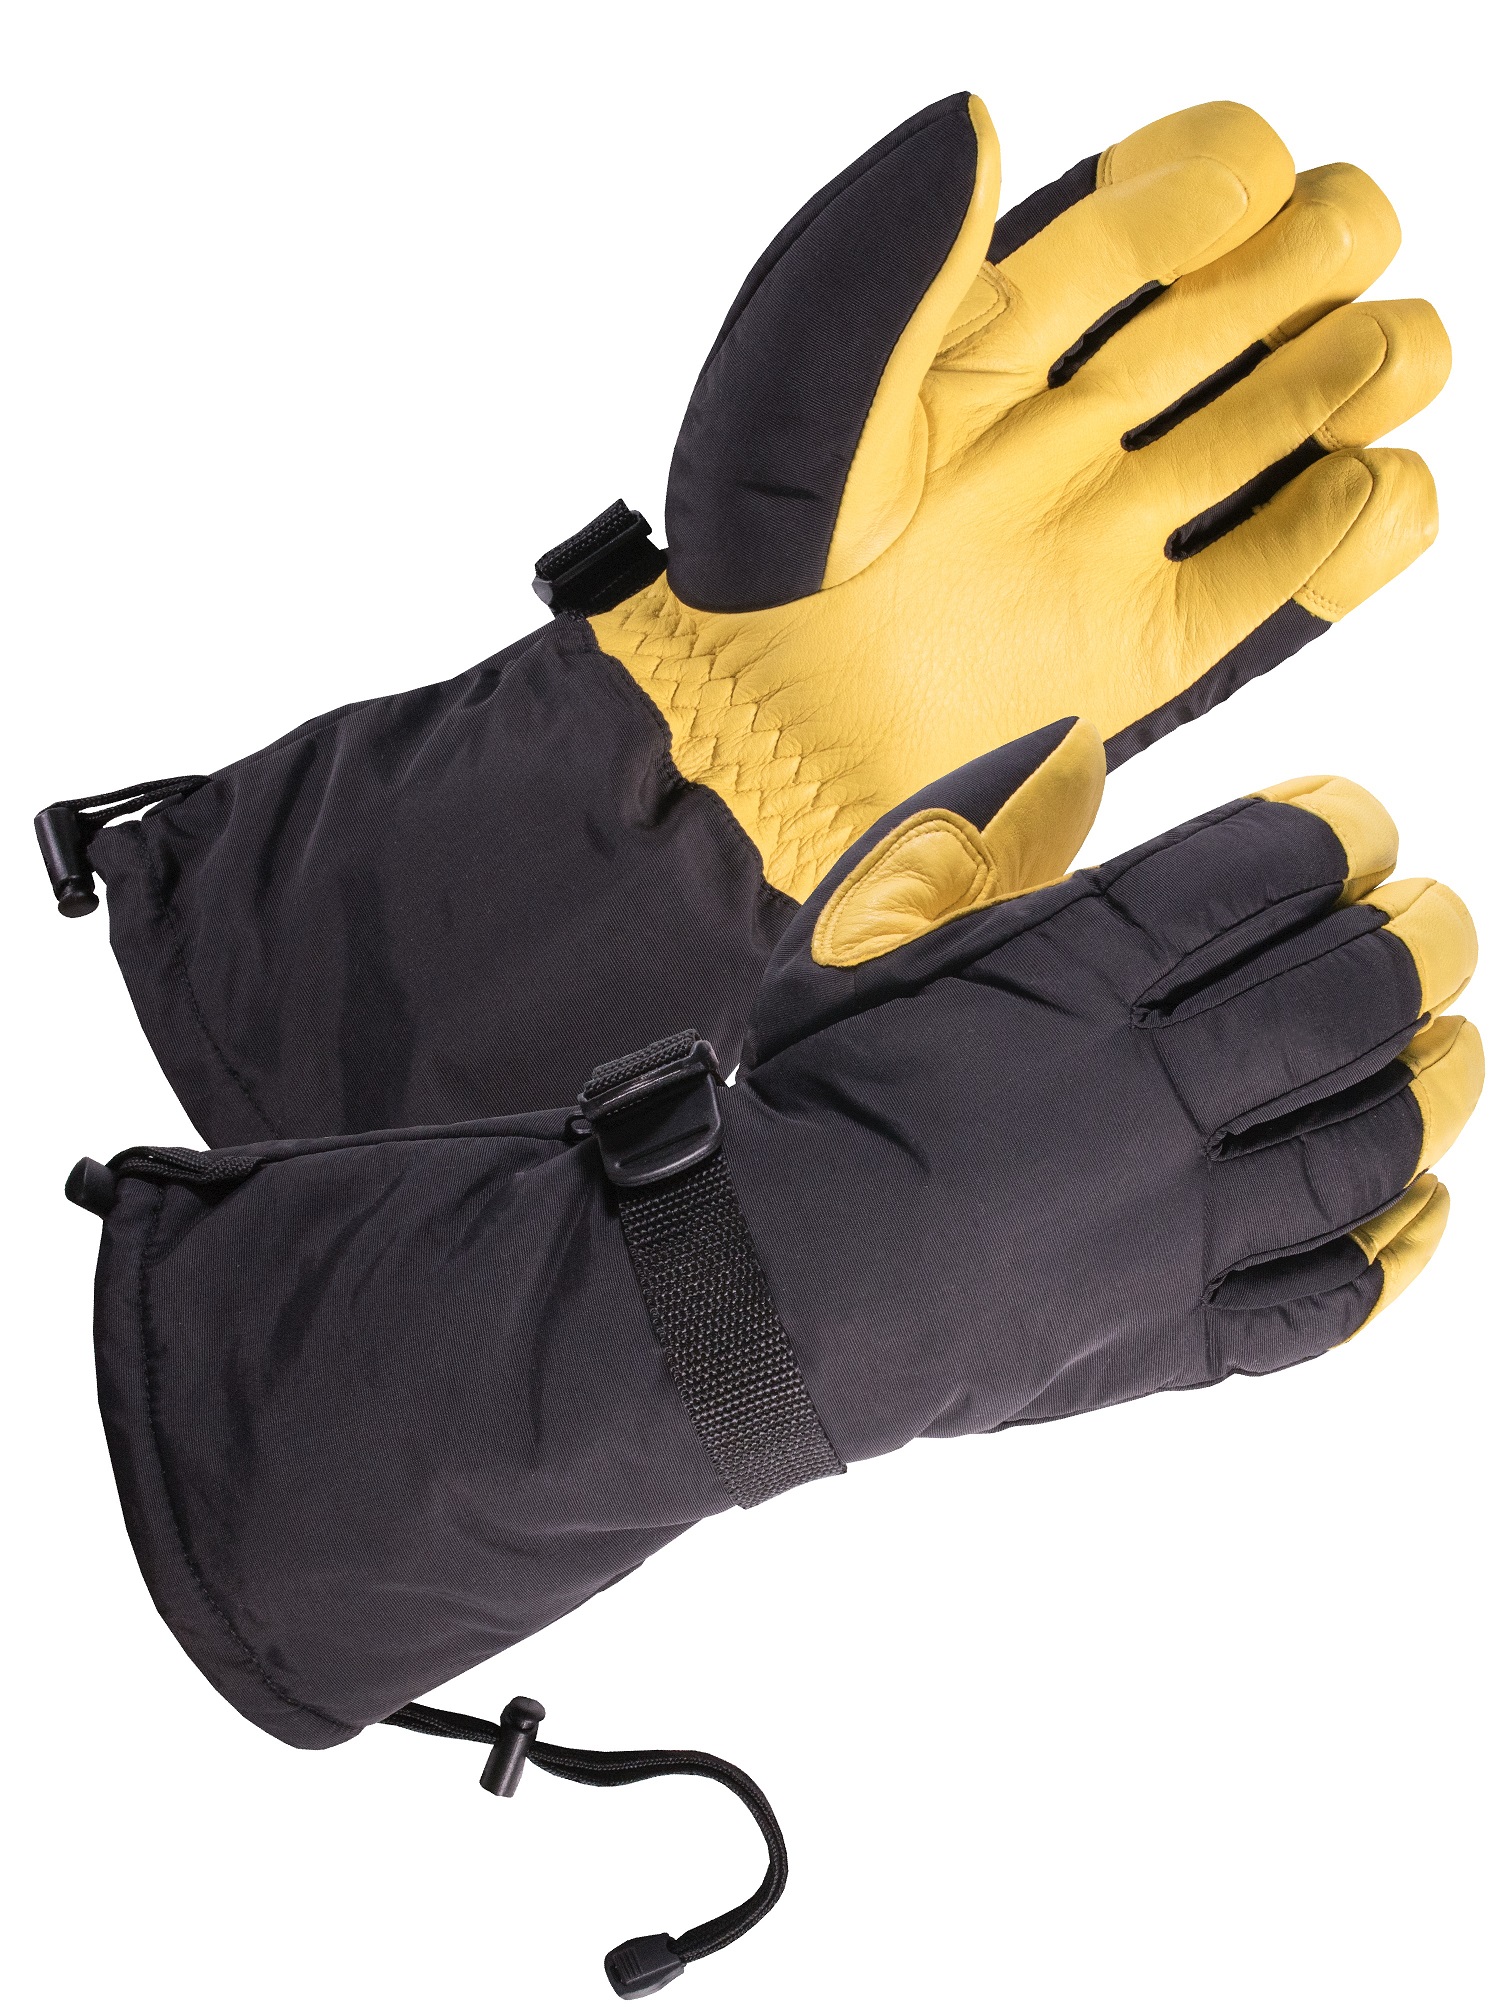 SD8648T SKYDEER Waterproof and Windproof Genuine Deerskin Leather Ski Gloves with 150g 3M Thinsulate Insulation 